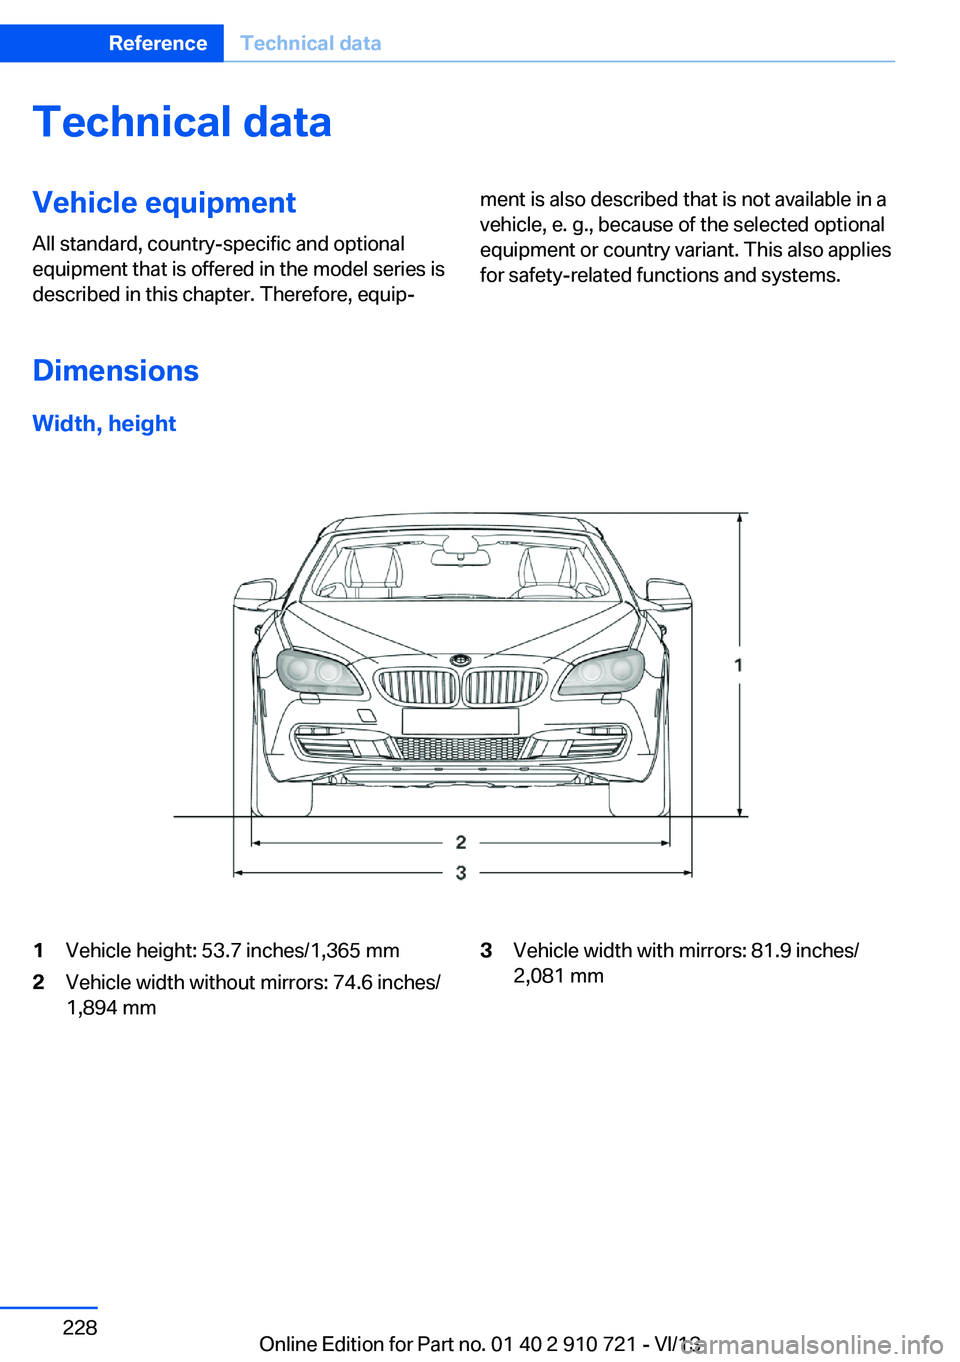 BMW 650I CONVERTIBLE 2014  Owners Manual Technical dataVehicle equipment
All standard, country-specific and optional
equipment that is offered in the model series is
described in this chapter. Therefore, equip‐ment is also described that i